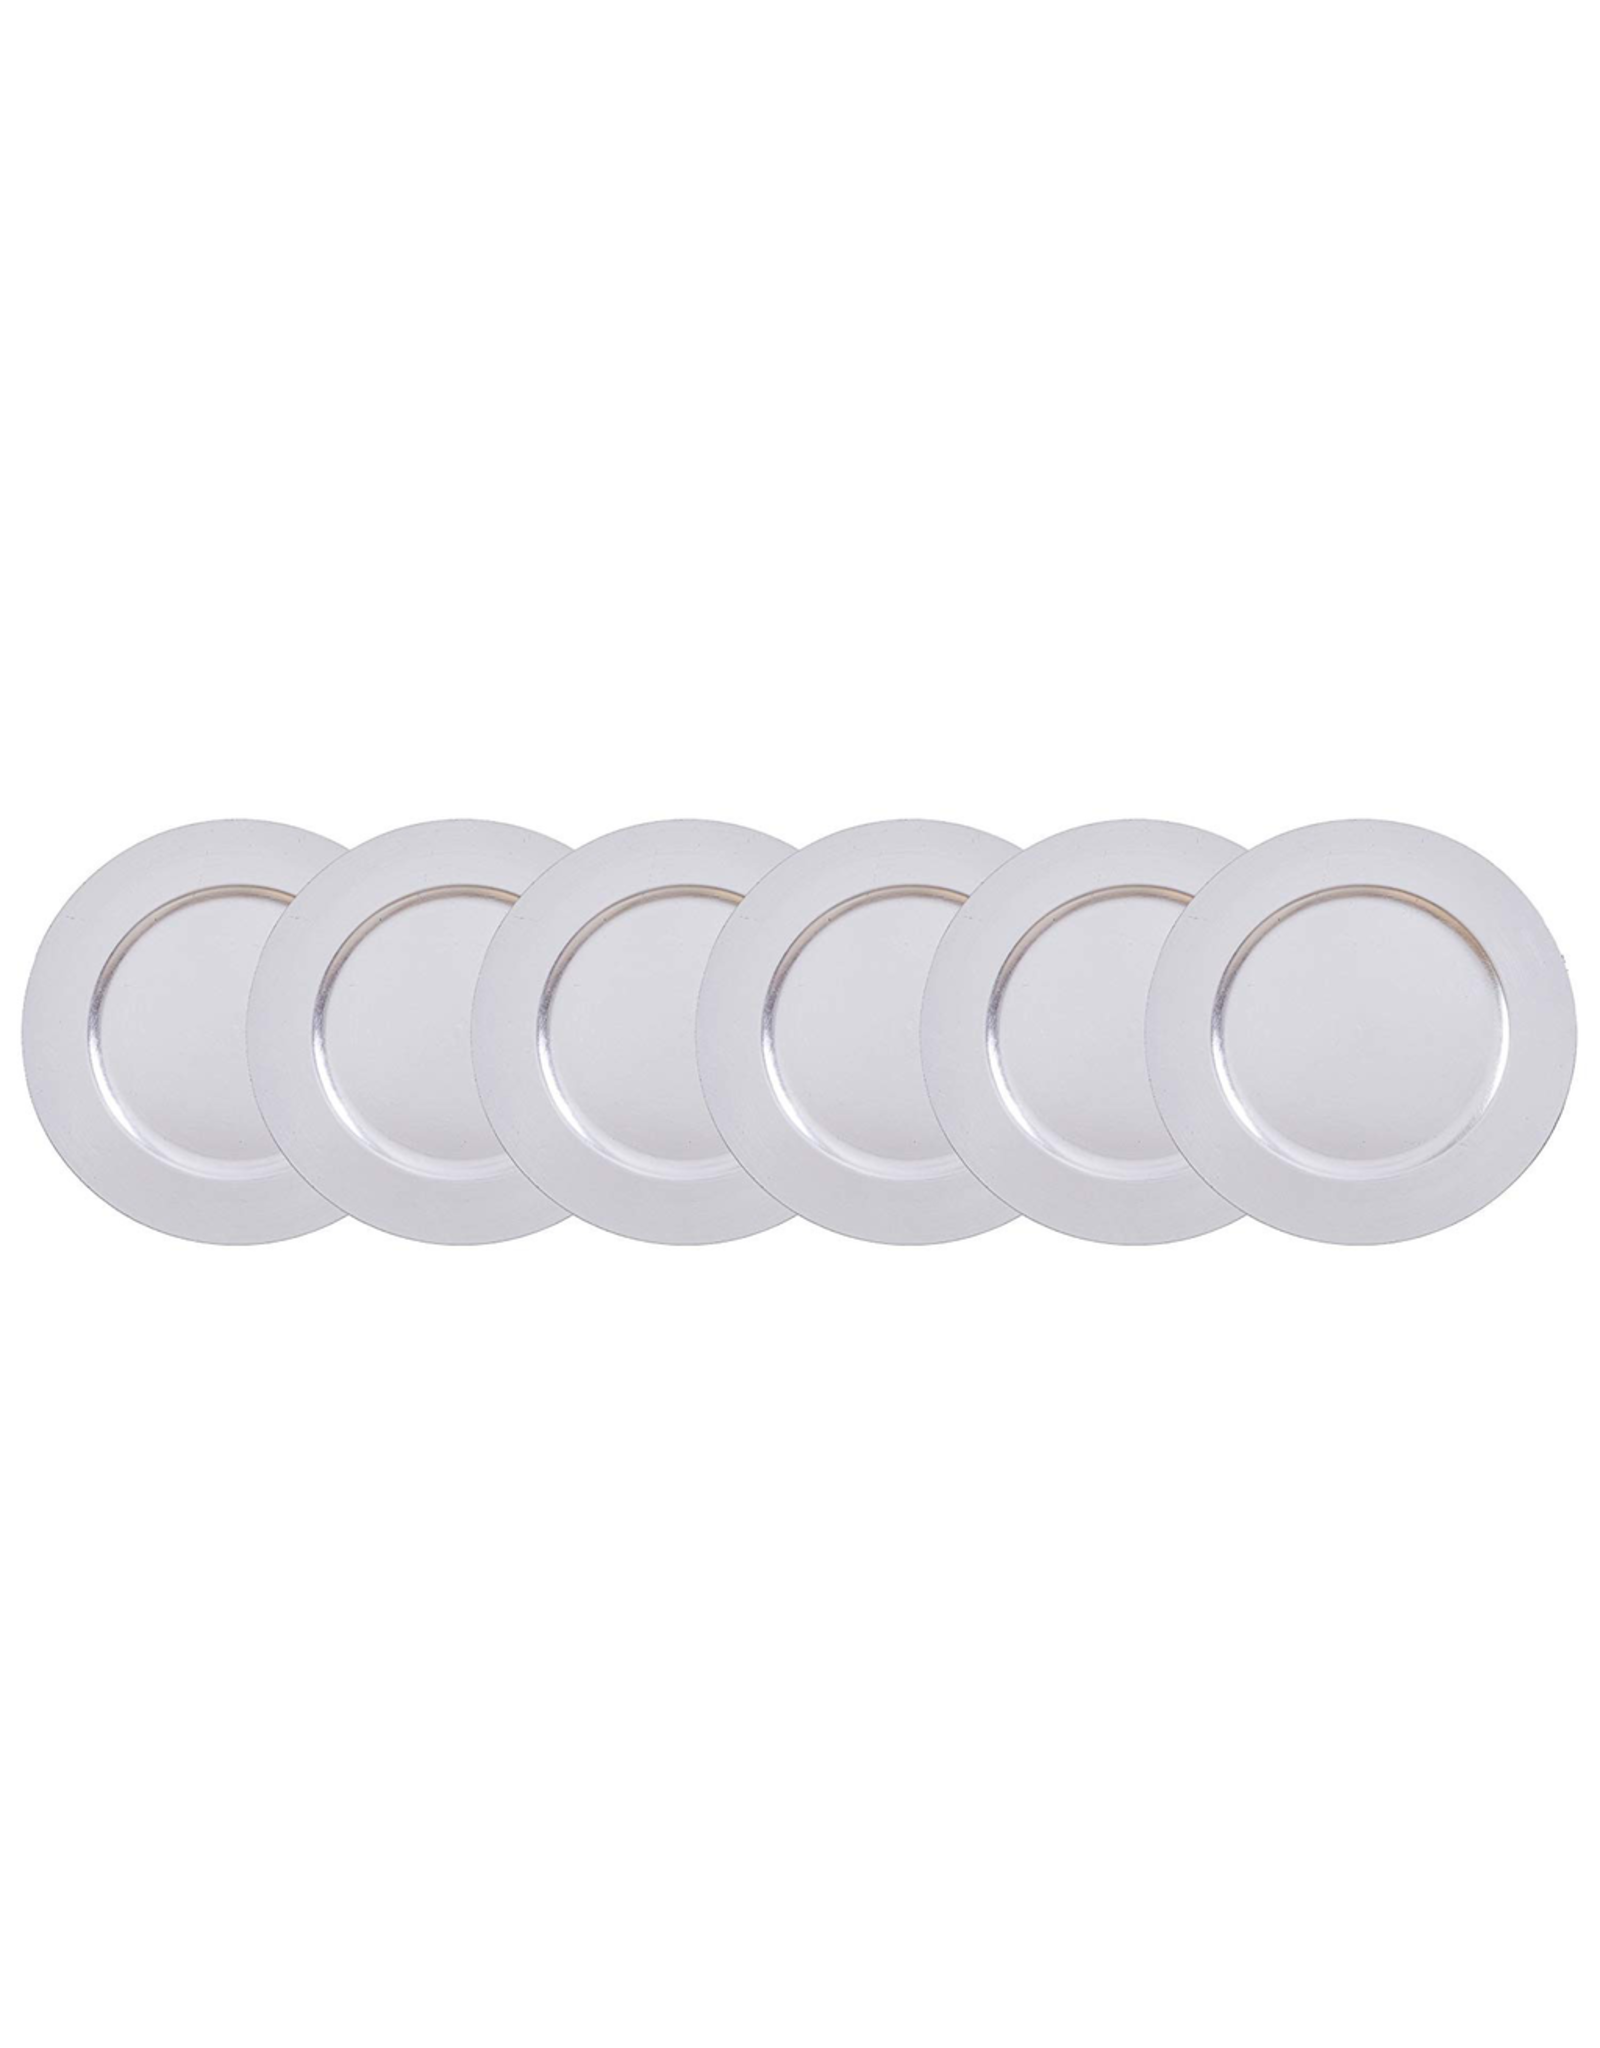 Darice Charger Plates Pack of 6 Plastic Metallic Silver Chargers